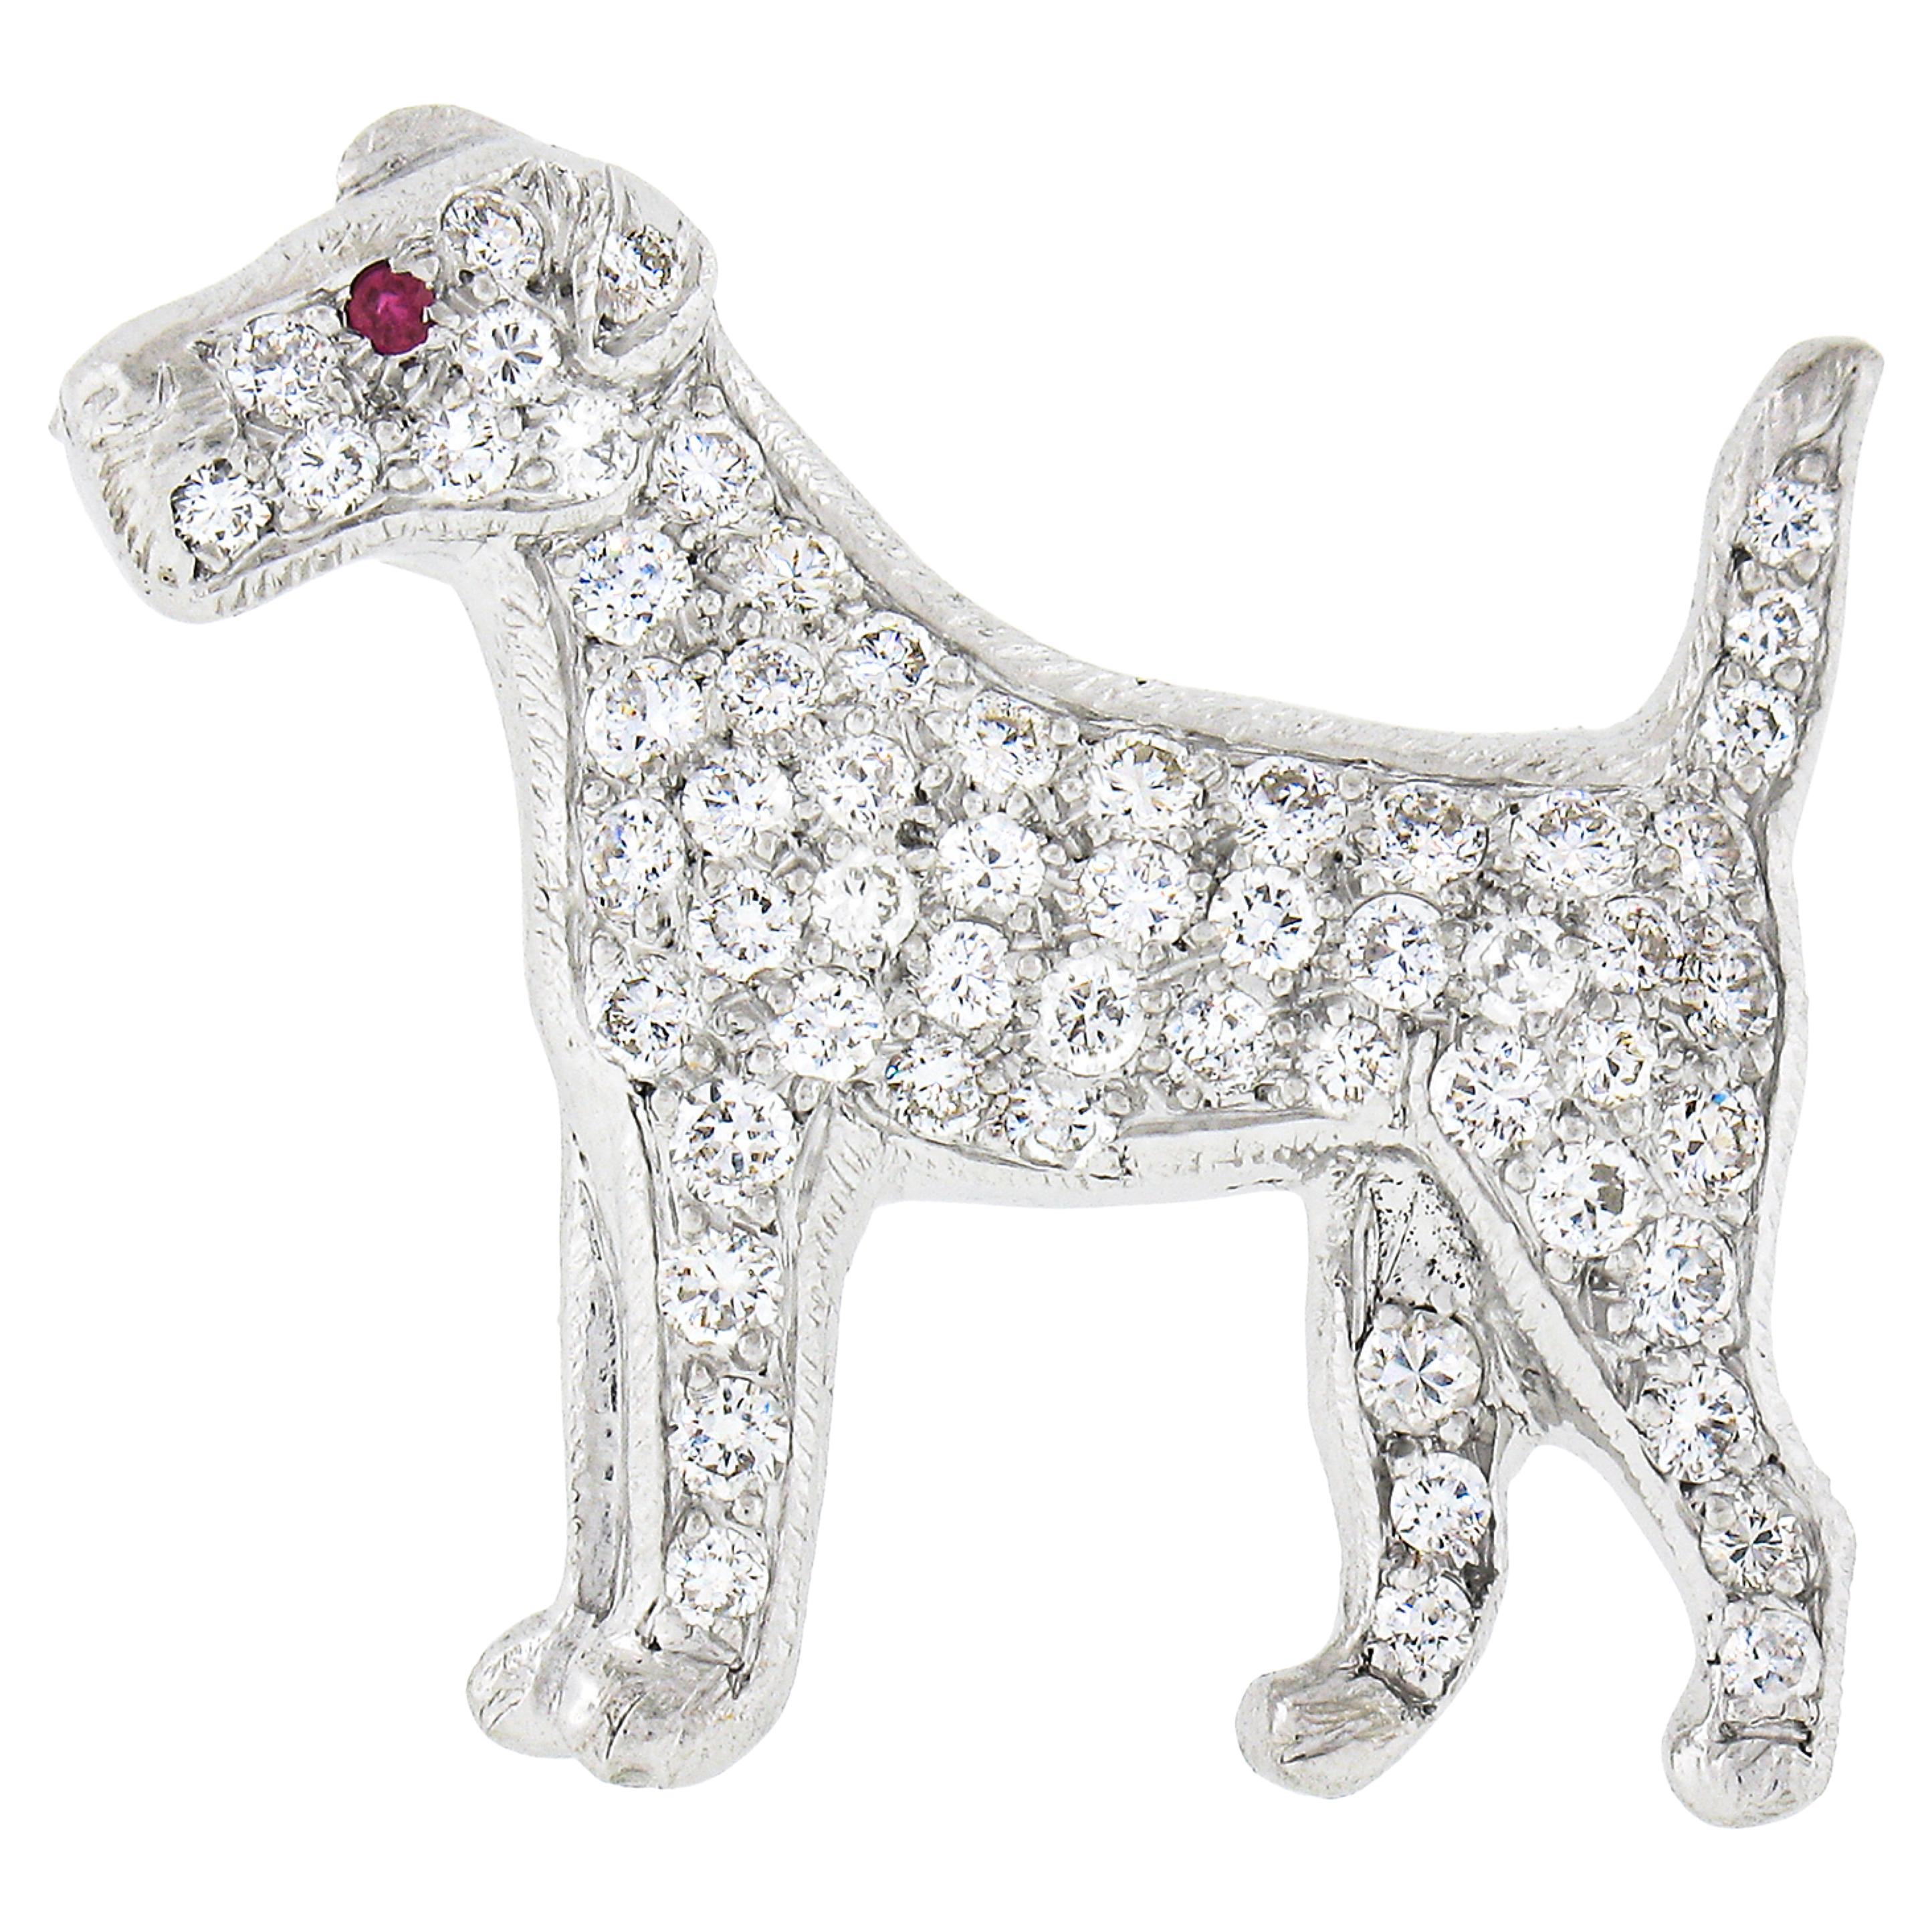 Vintage Platinum 1.27ctw Diamond Covered Airedale Dog Pin Brooch w/ Red Ruby Eye